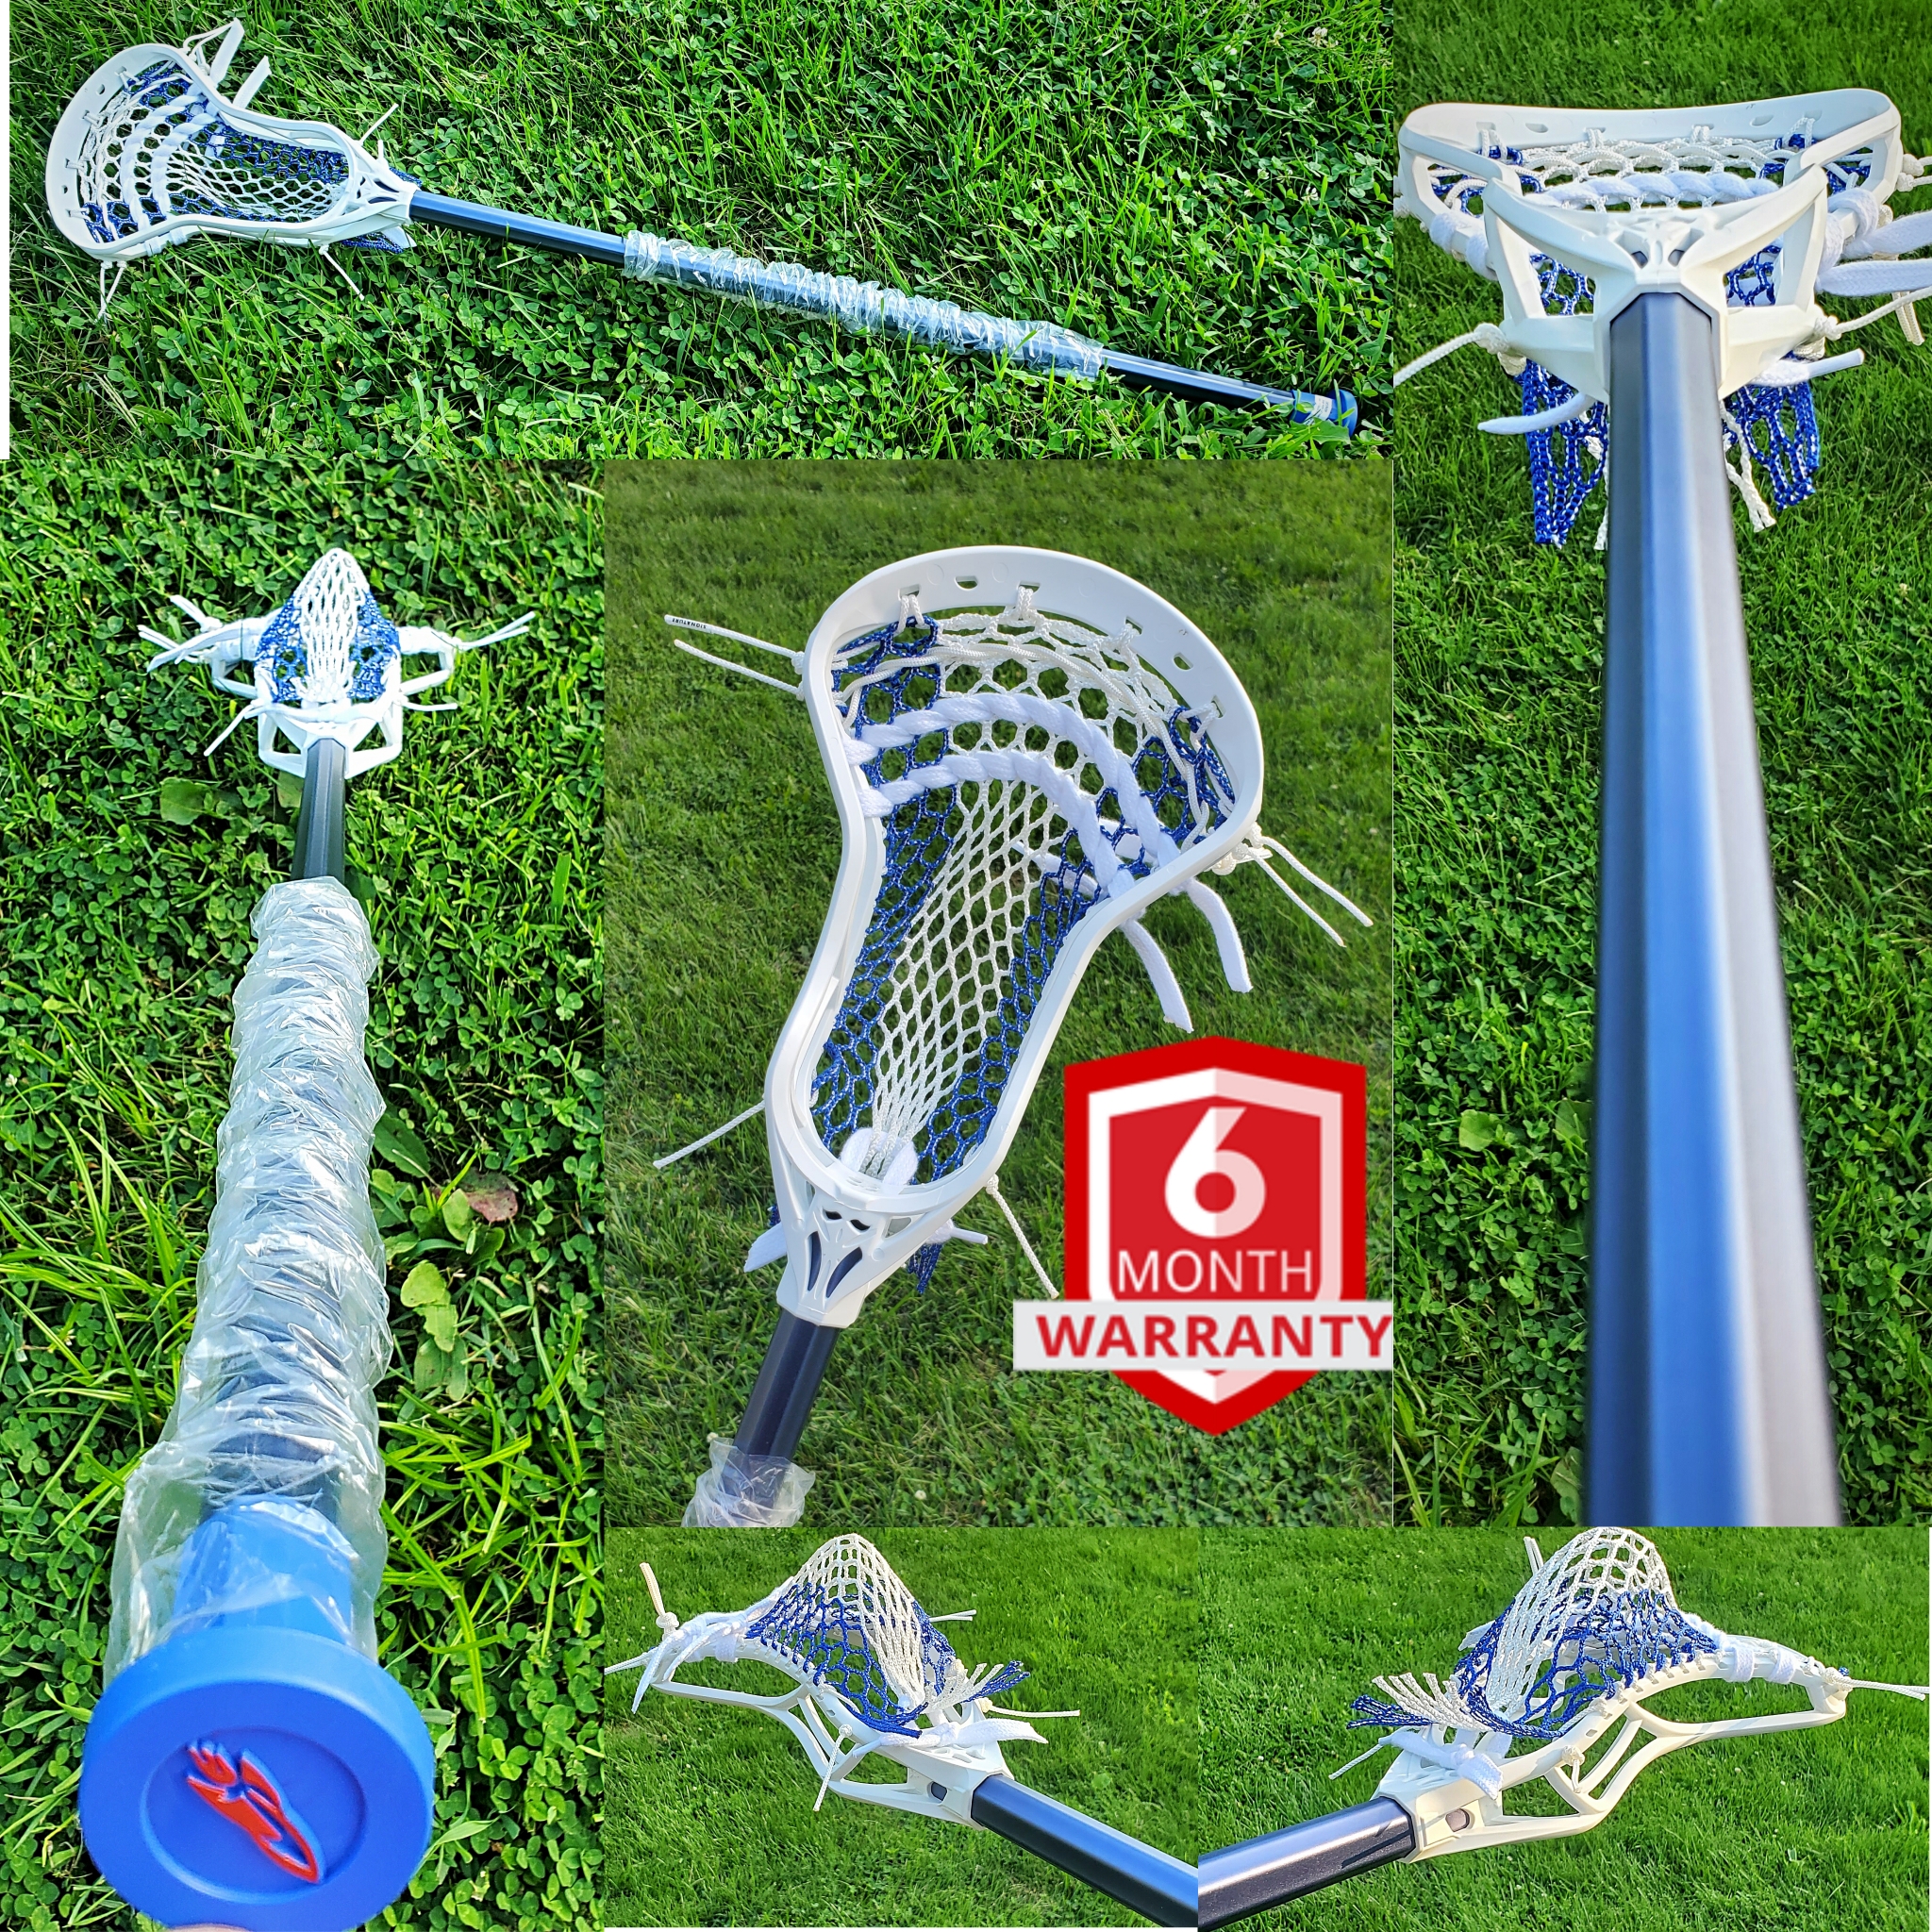 NEW Complete Lacrosse Stick w/ Element Onset Head Strung w/ Semi Soft Mesh-NO TRADES NO OFFERS